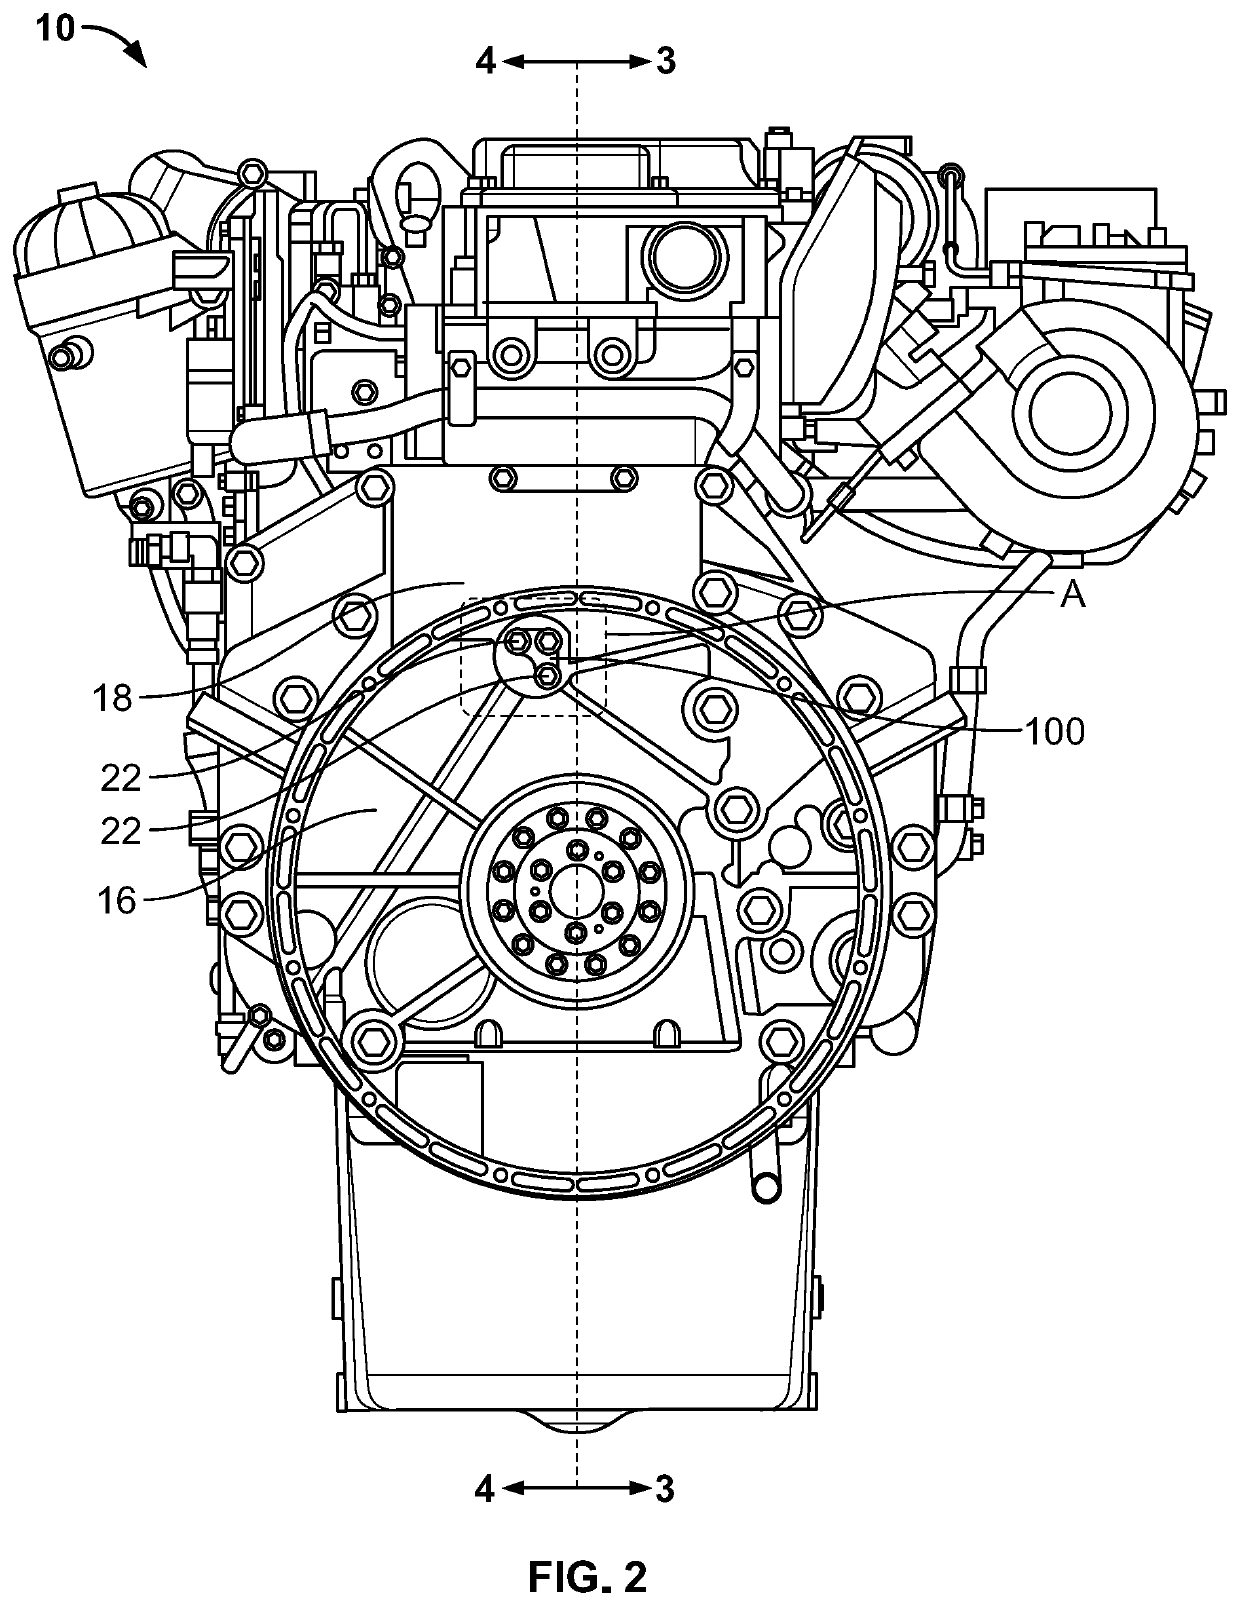 Enhanced idler shaft interface for improving structural integrity of flywheel housing